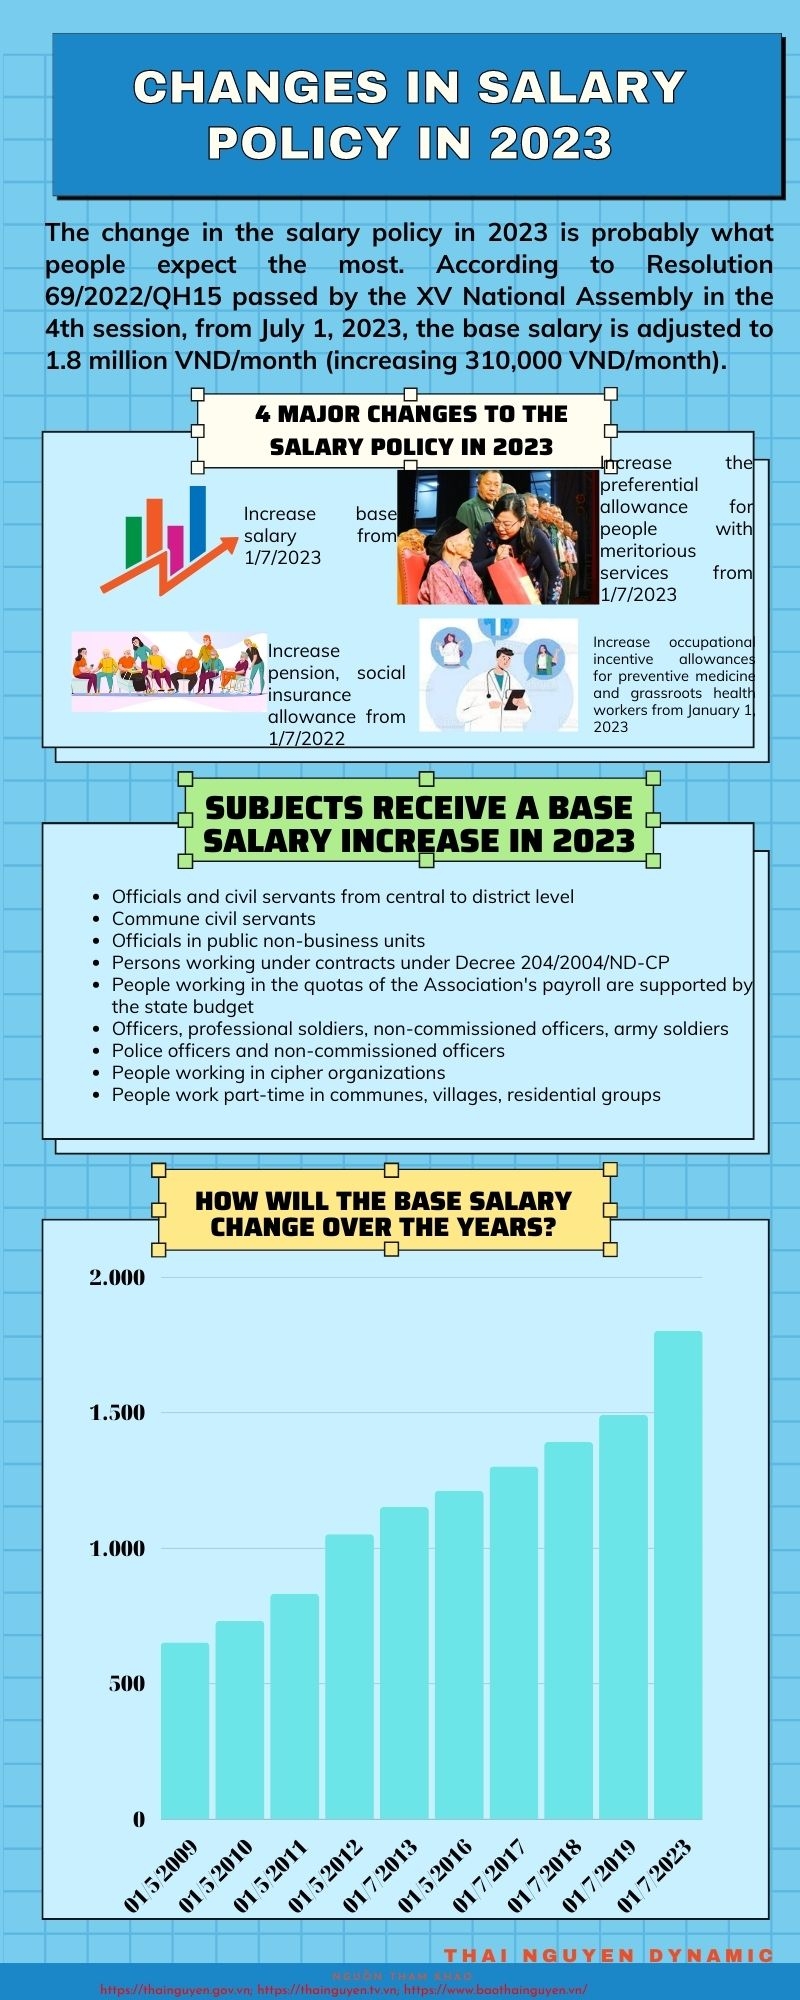 [Infographic] Changes in salary policy in 2023